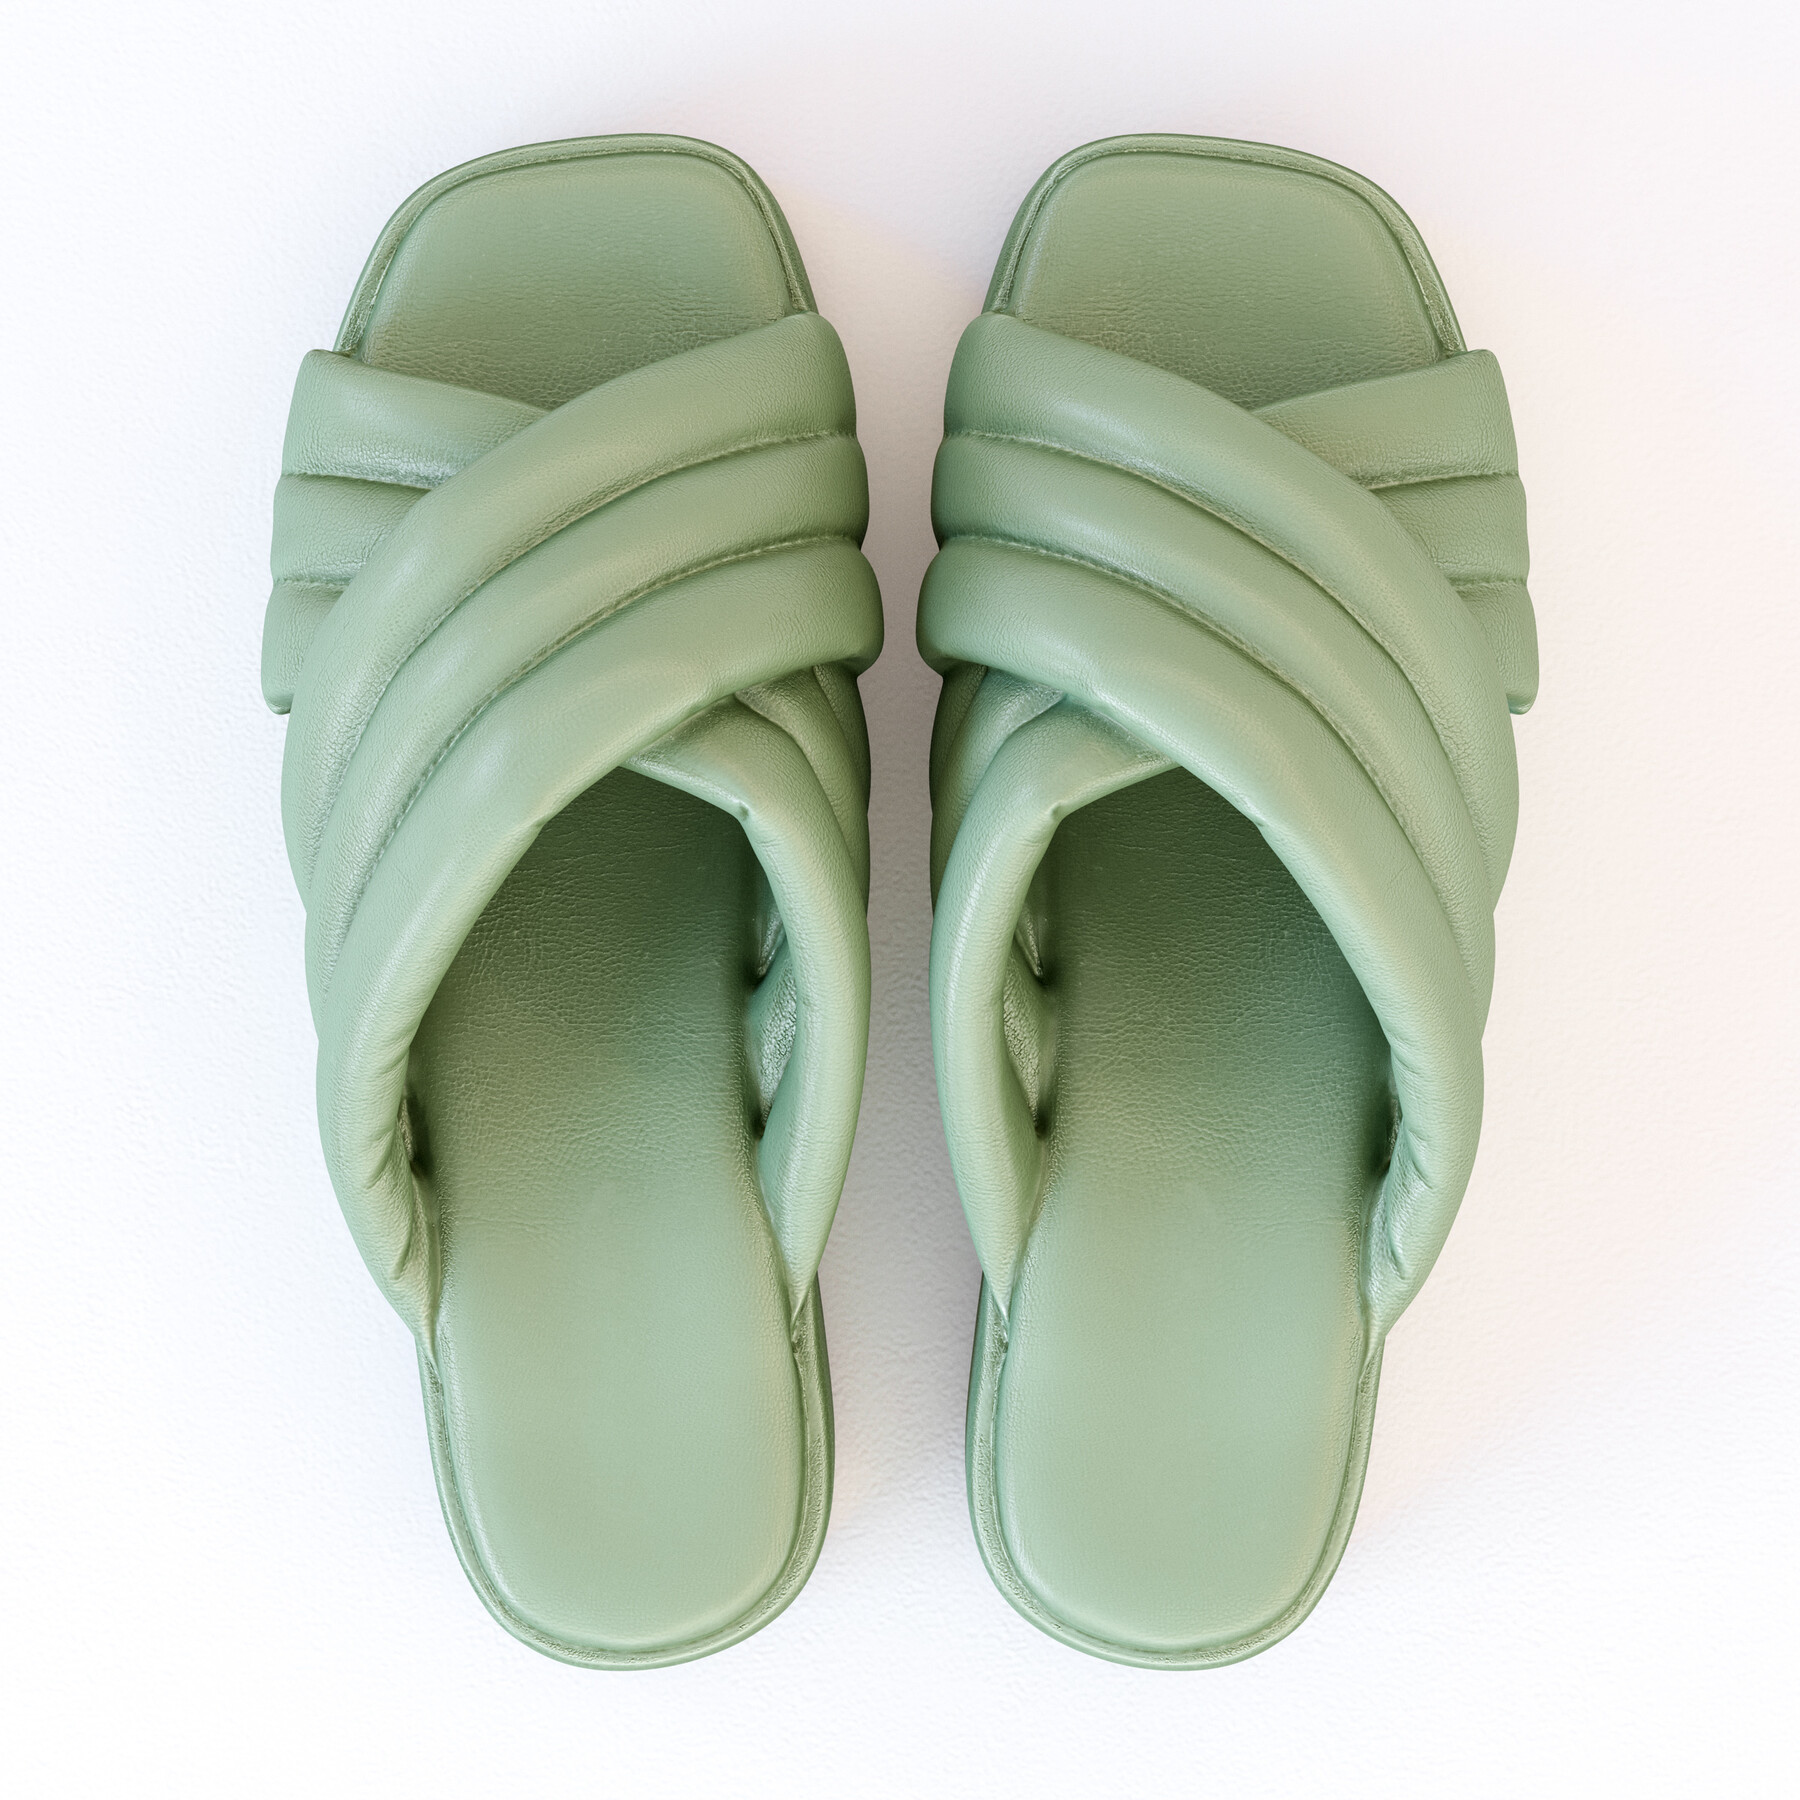 ArtStation - Female Shoes / Padded Leather Sandals Low-poly 3D model ...